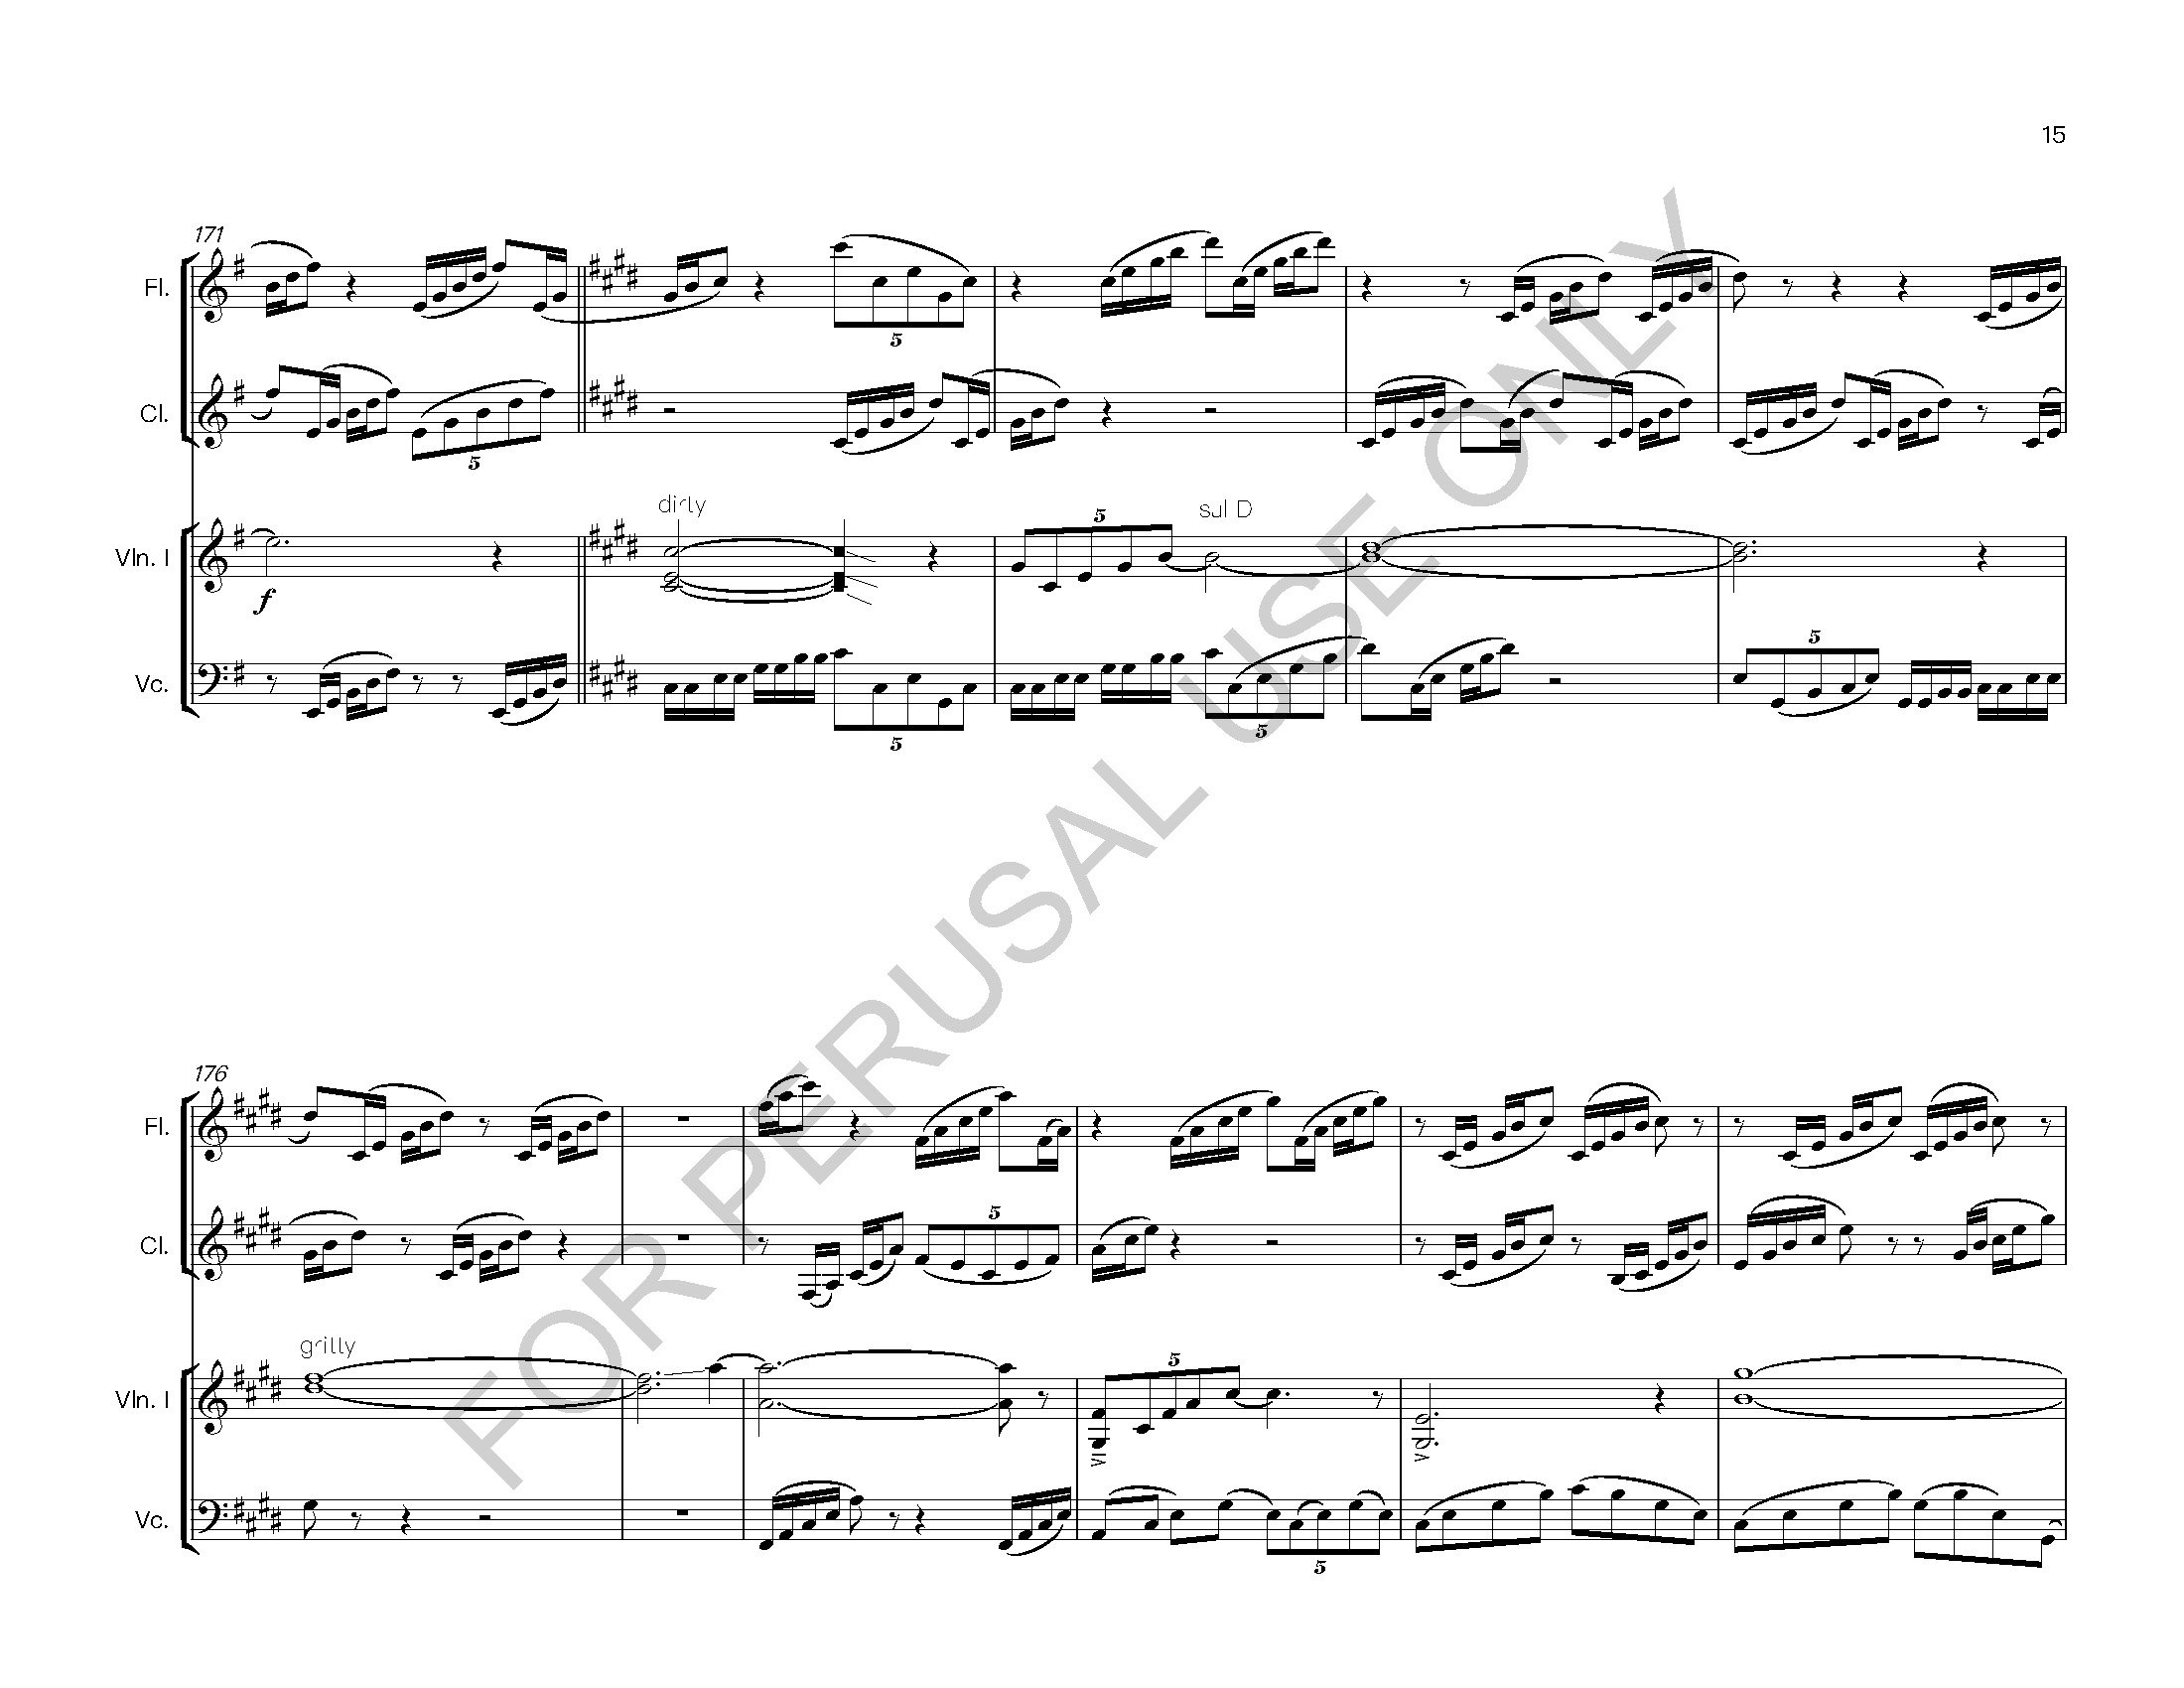 Thread the Needle - Full Score in C_Page_15.jpg